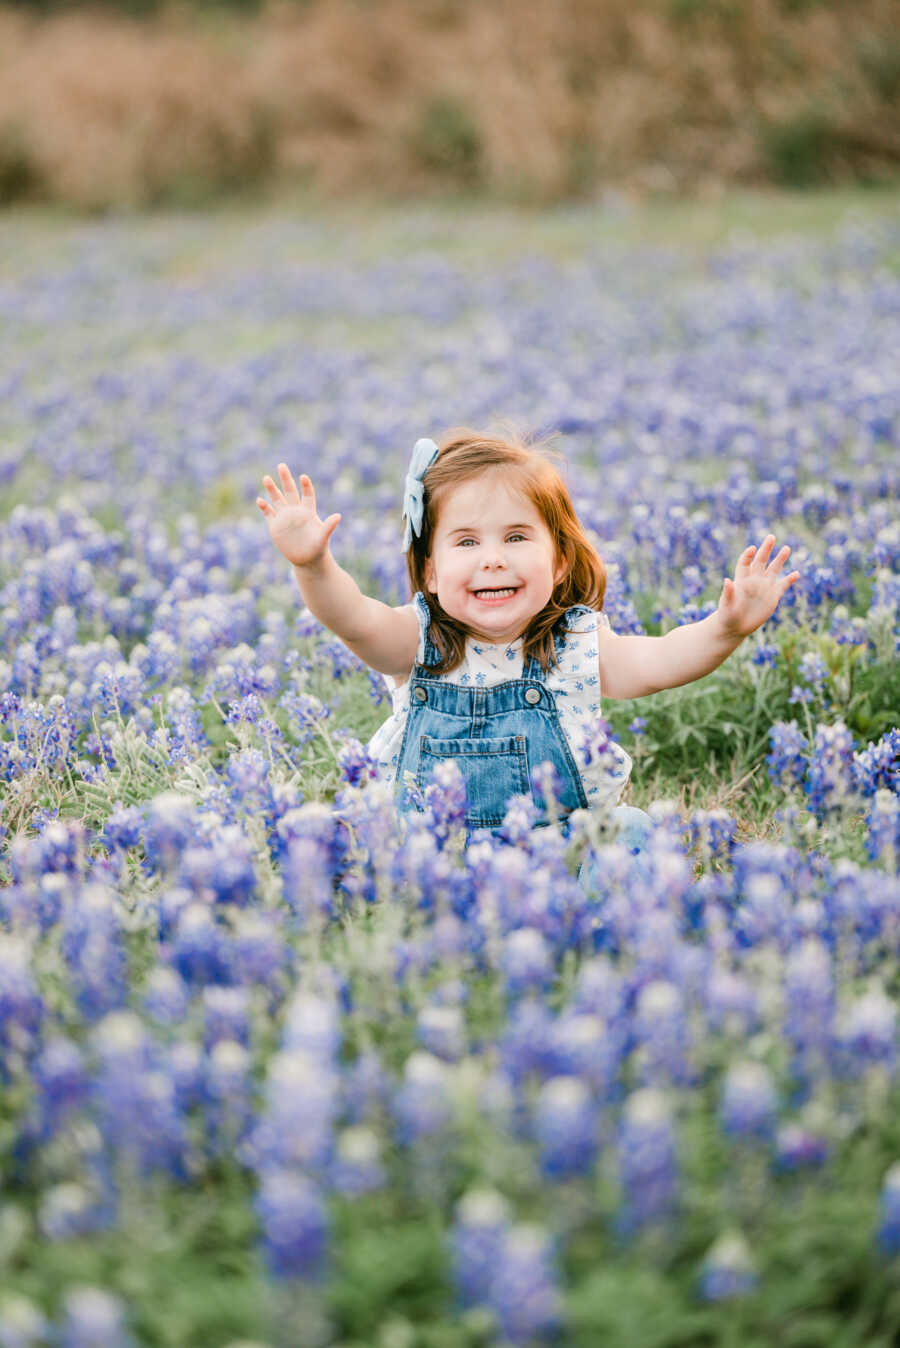 Toddler with rare genetic disorder sits in lavender field smiling